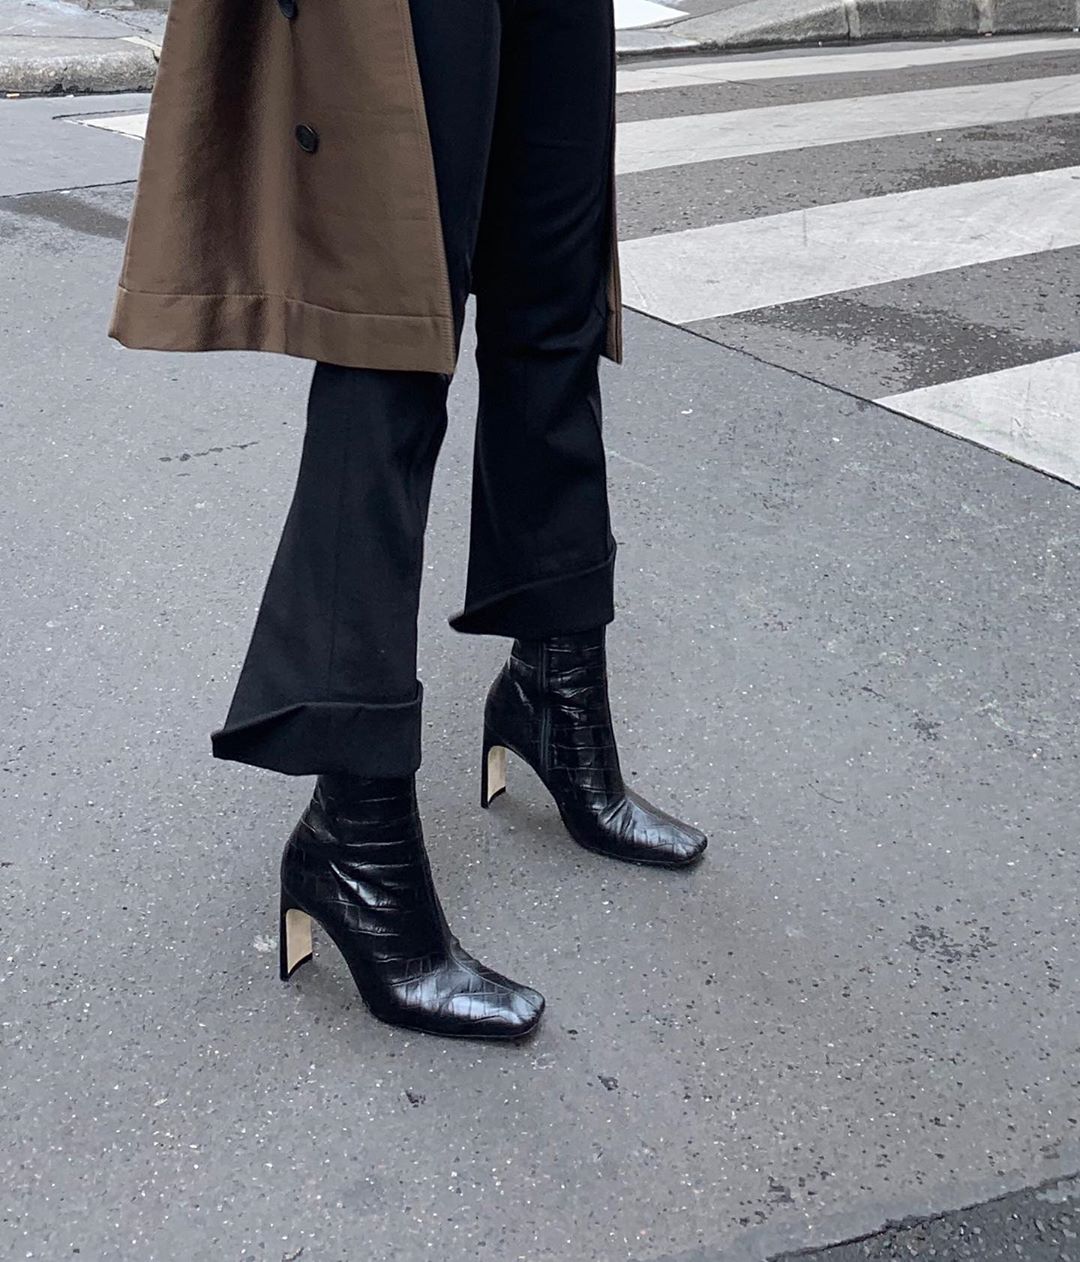 The Coolest Square-Toe Boots to Buy Now